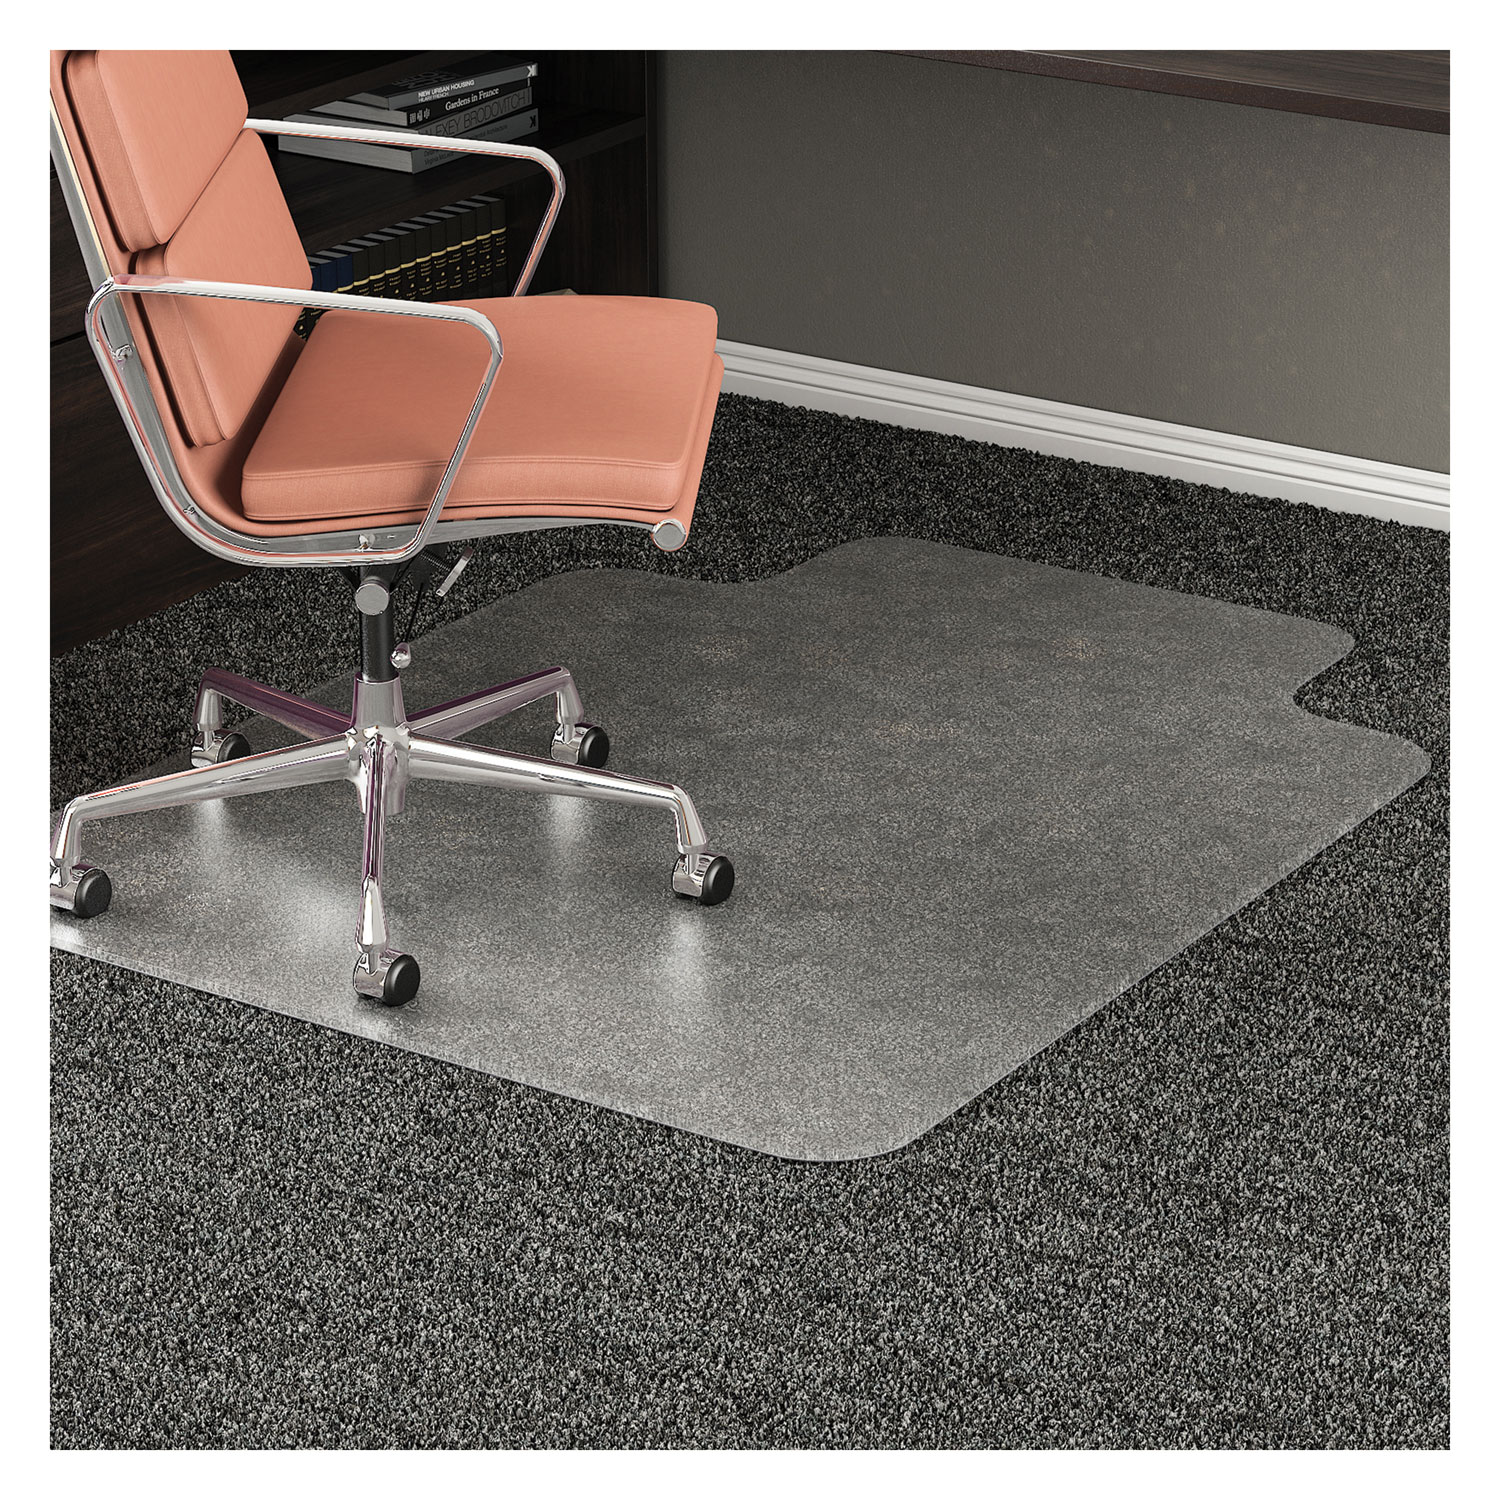 RollaMat Frequent Use Chair Mat, Med Pile Carpet, Roll, 36 x 48, Lipped, CR